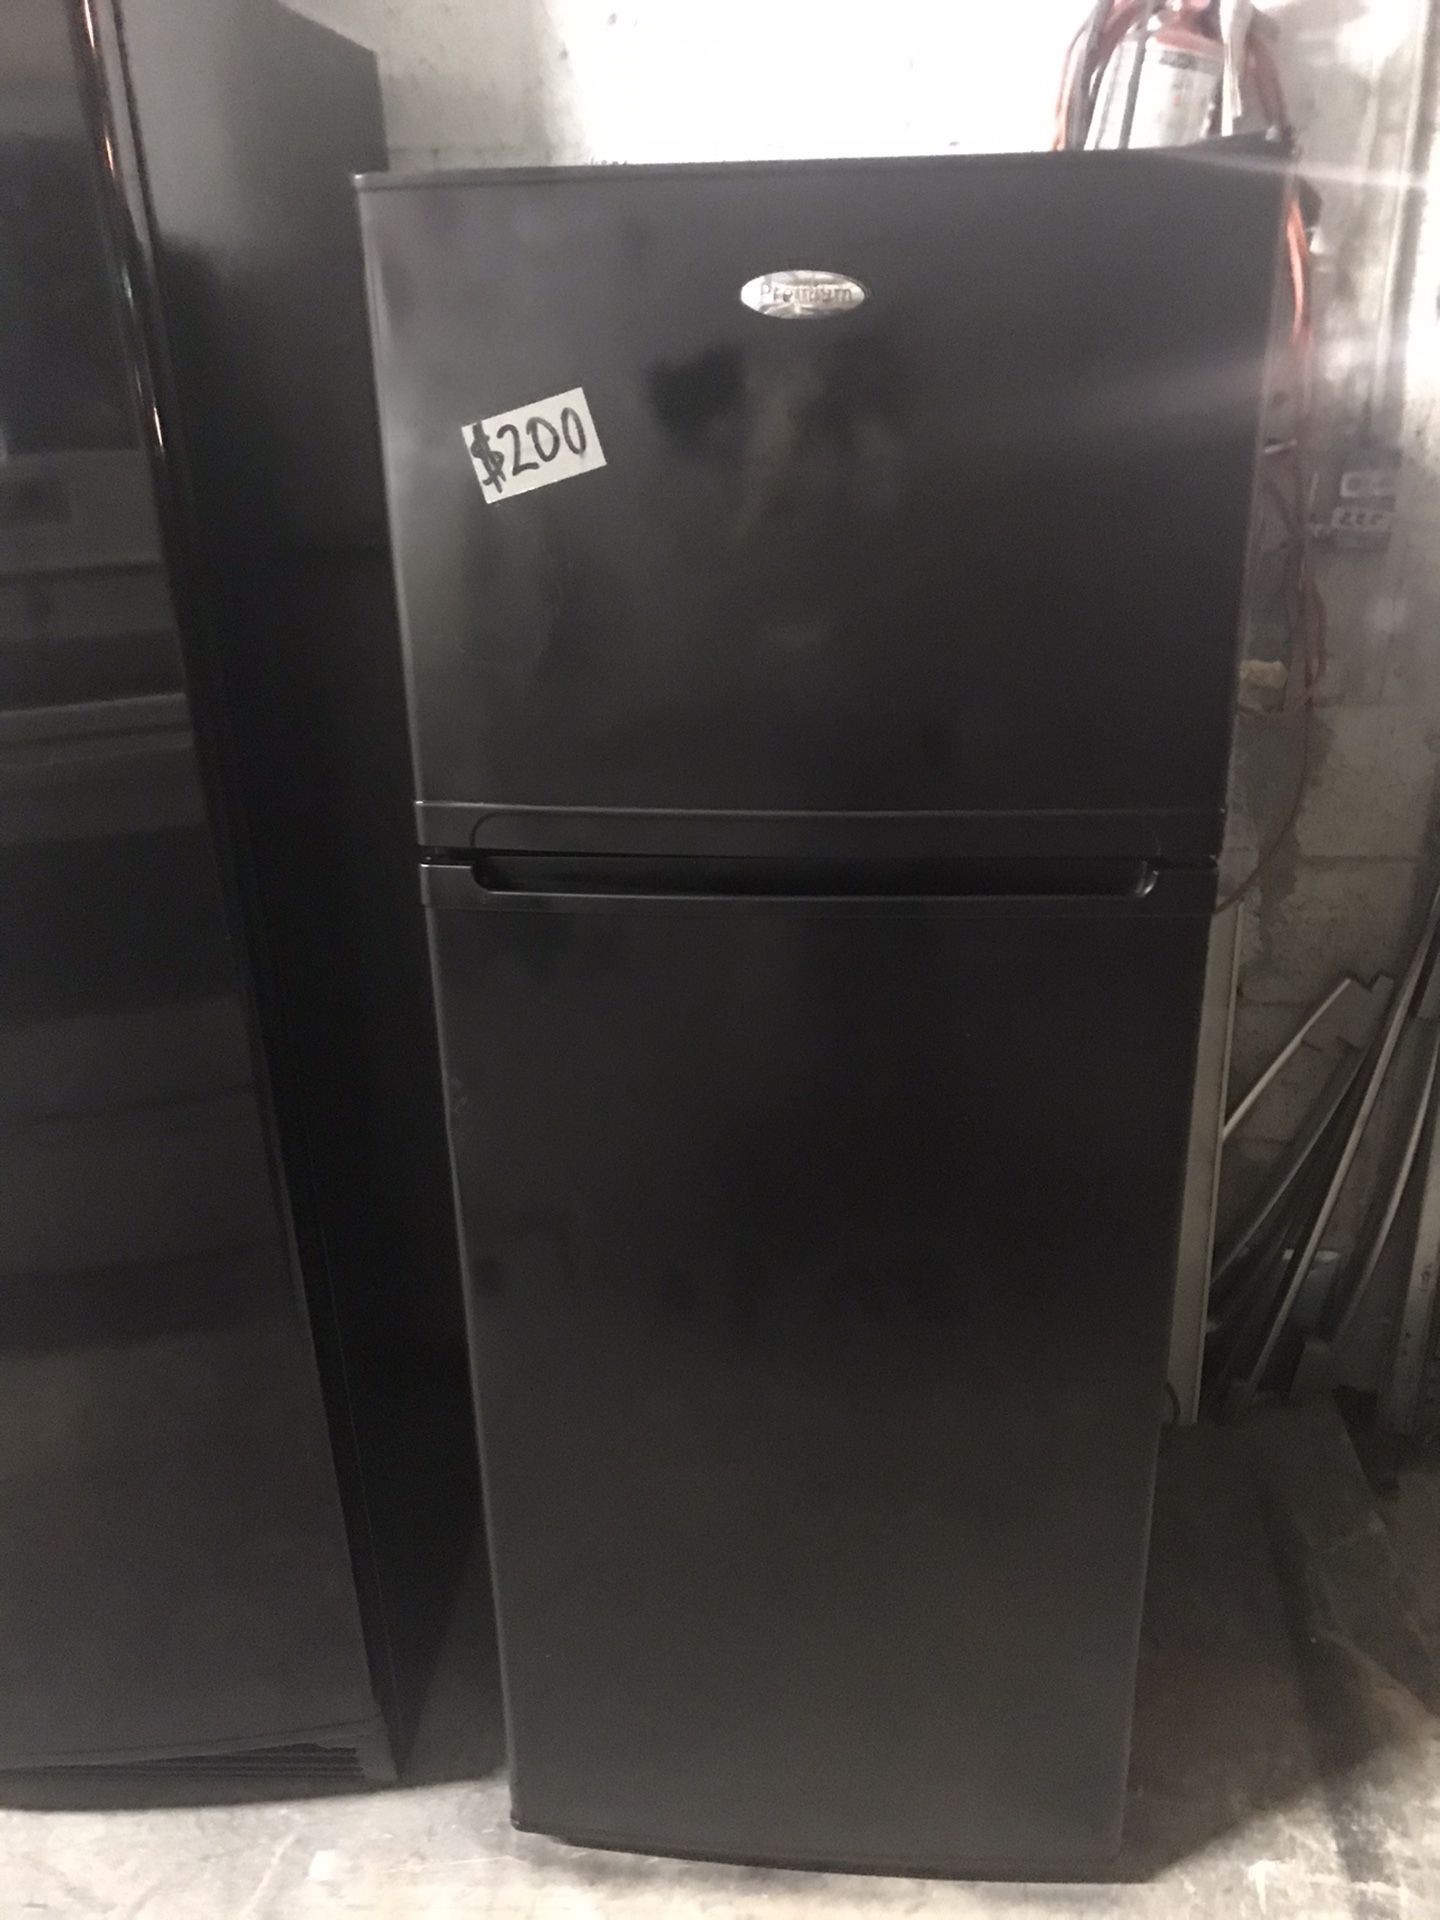 Premium black refrigerator 23” Wide 60” Tall in excellent condition condition plus 6 months warranty. Delivery service available. Hablamos español